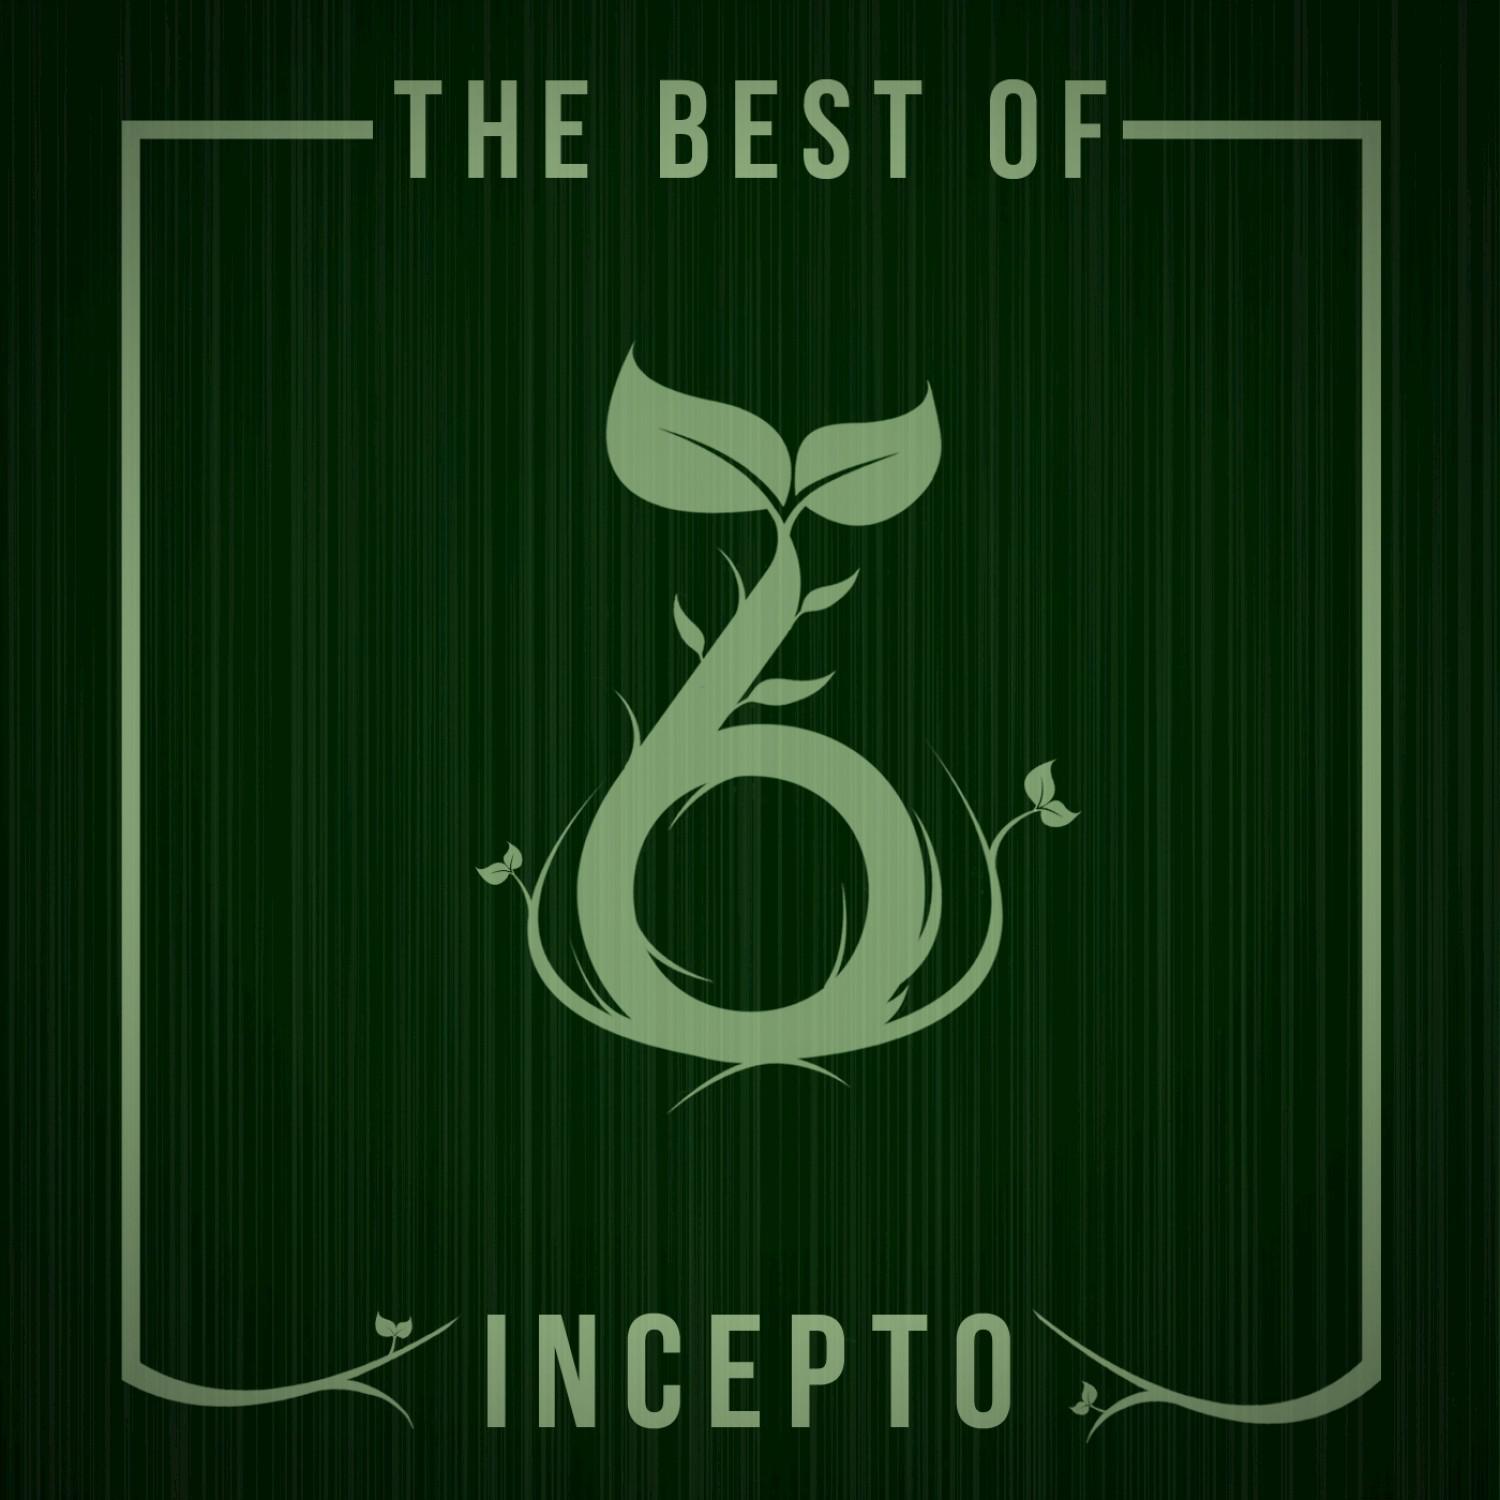 The Best of Incepto, Vol. 6